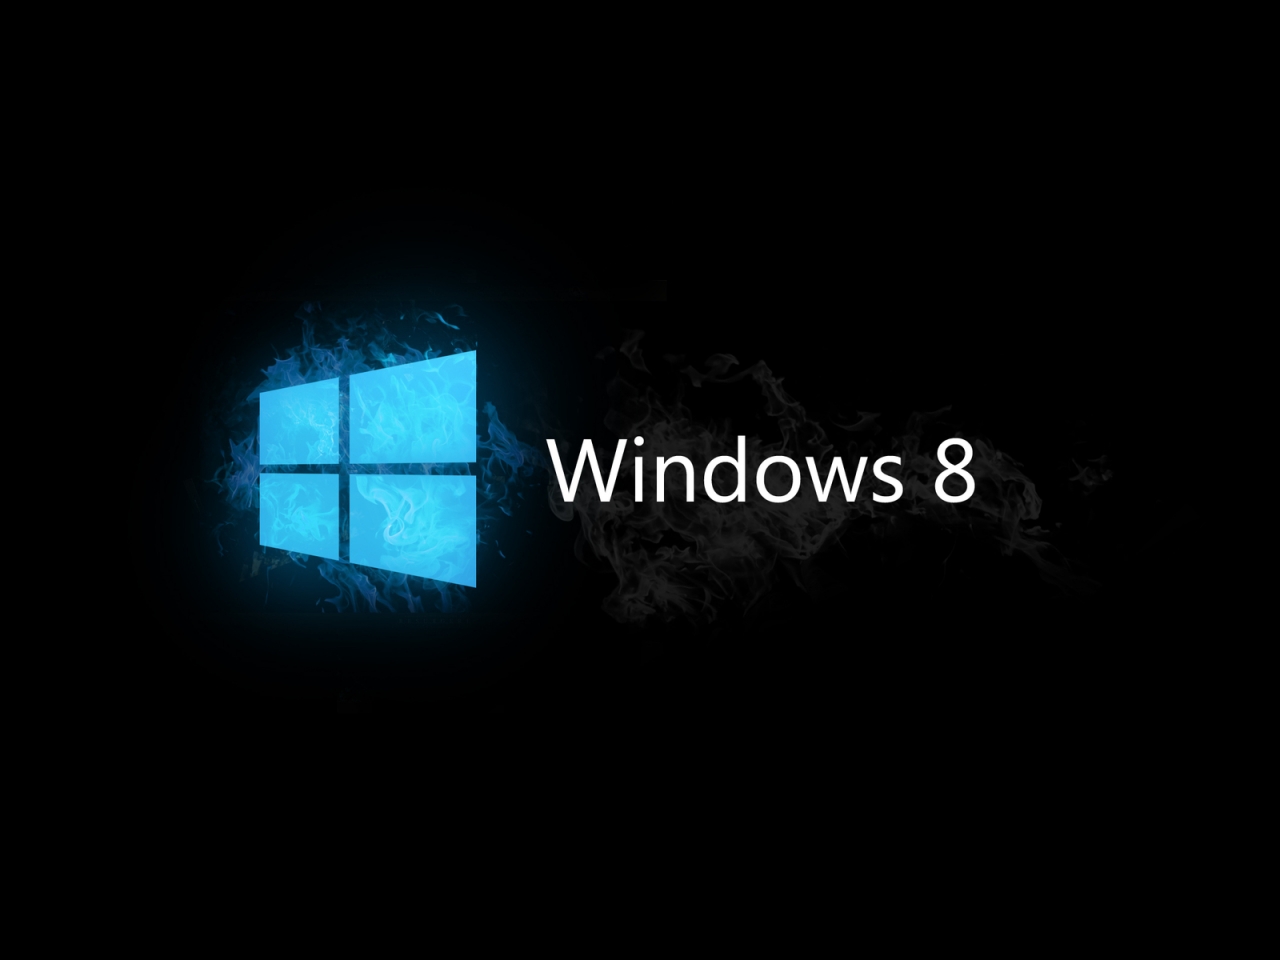 Windows 8 Blue and Black for 1280 x 960 resolution